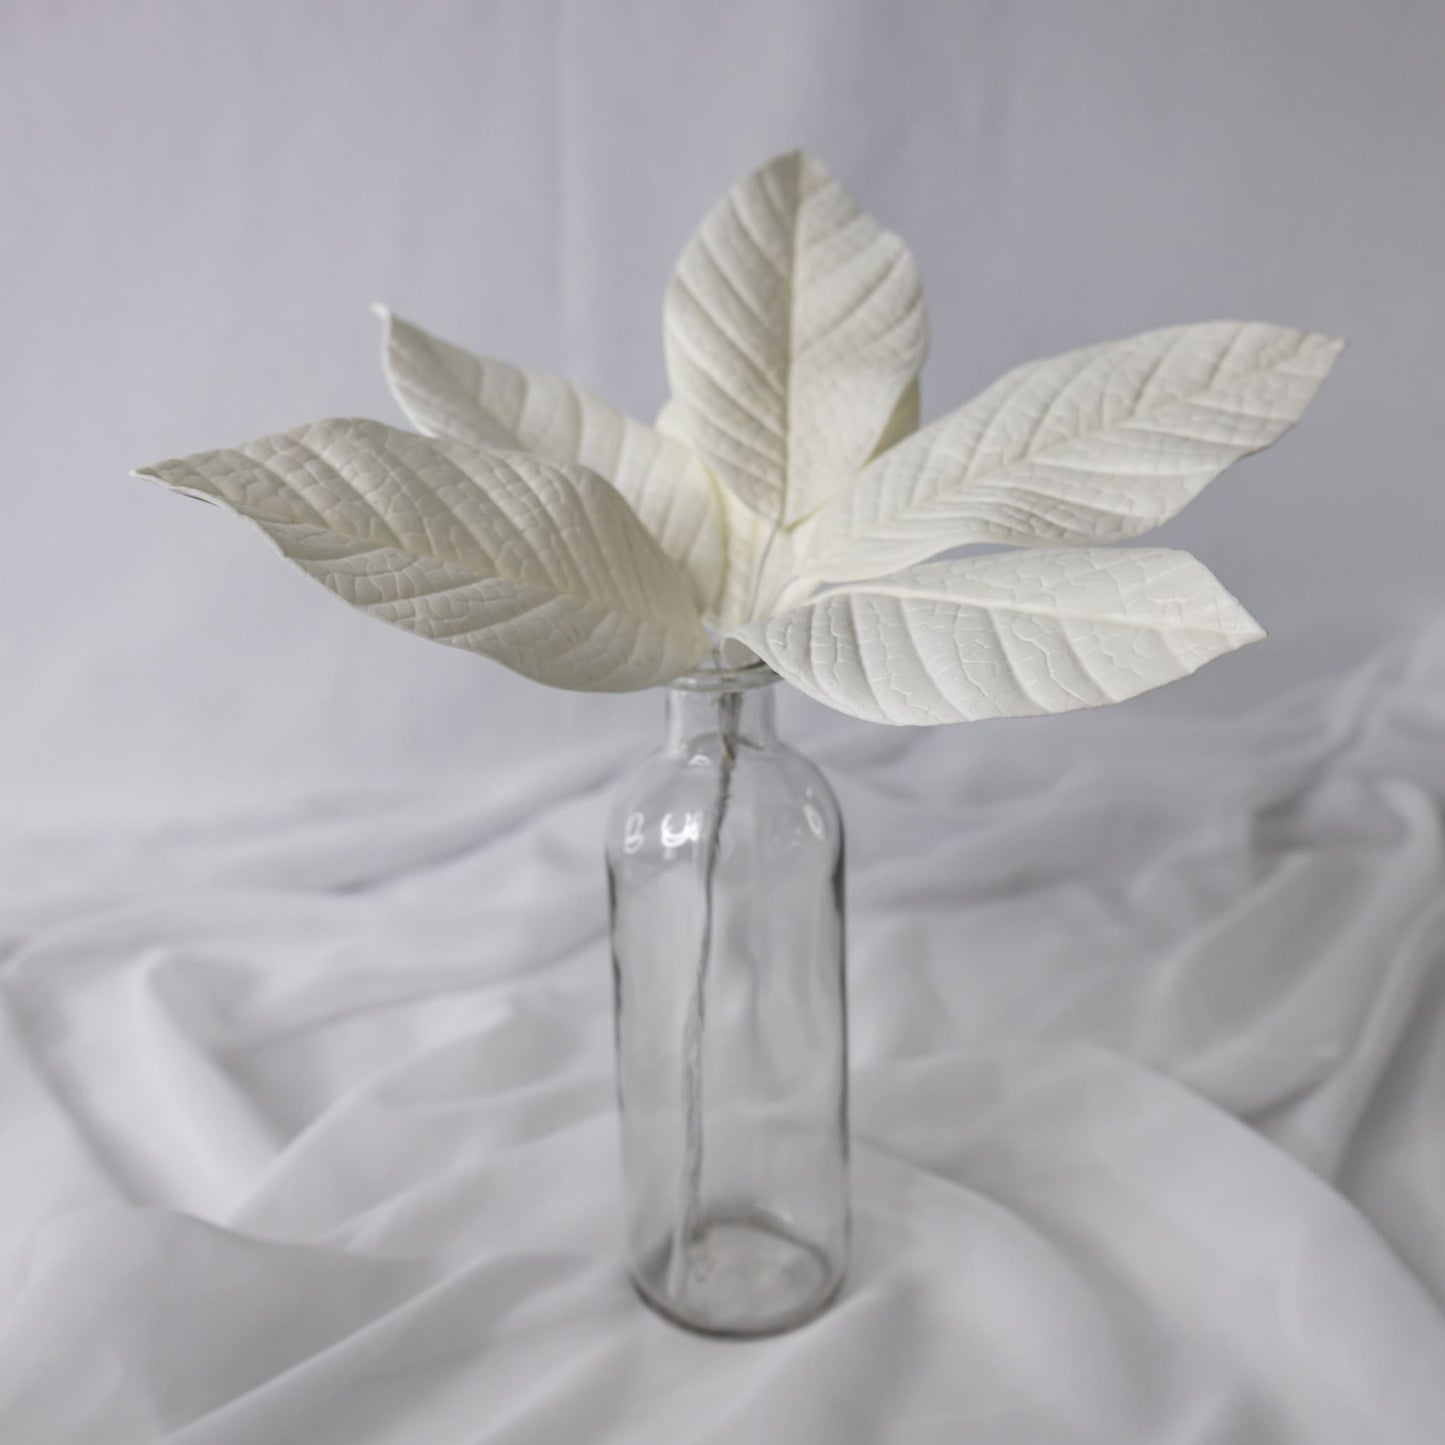 artificial white gardenia leaves placed in transparent glass vase